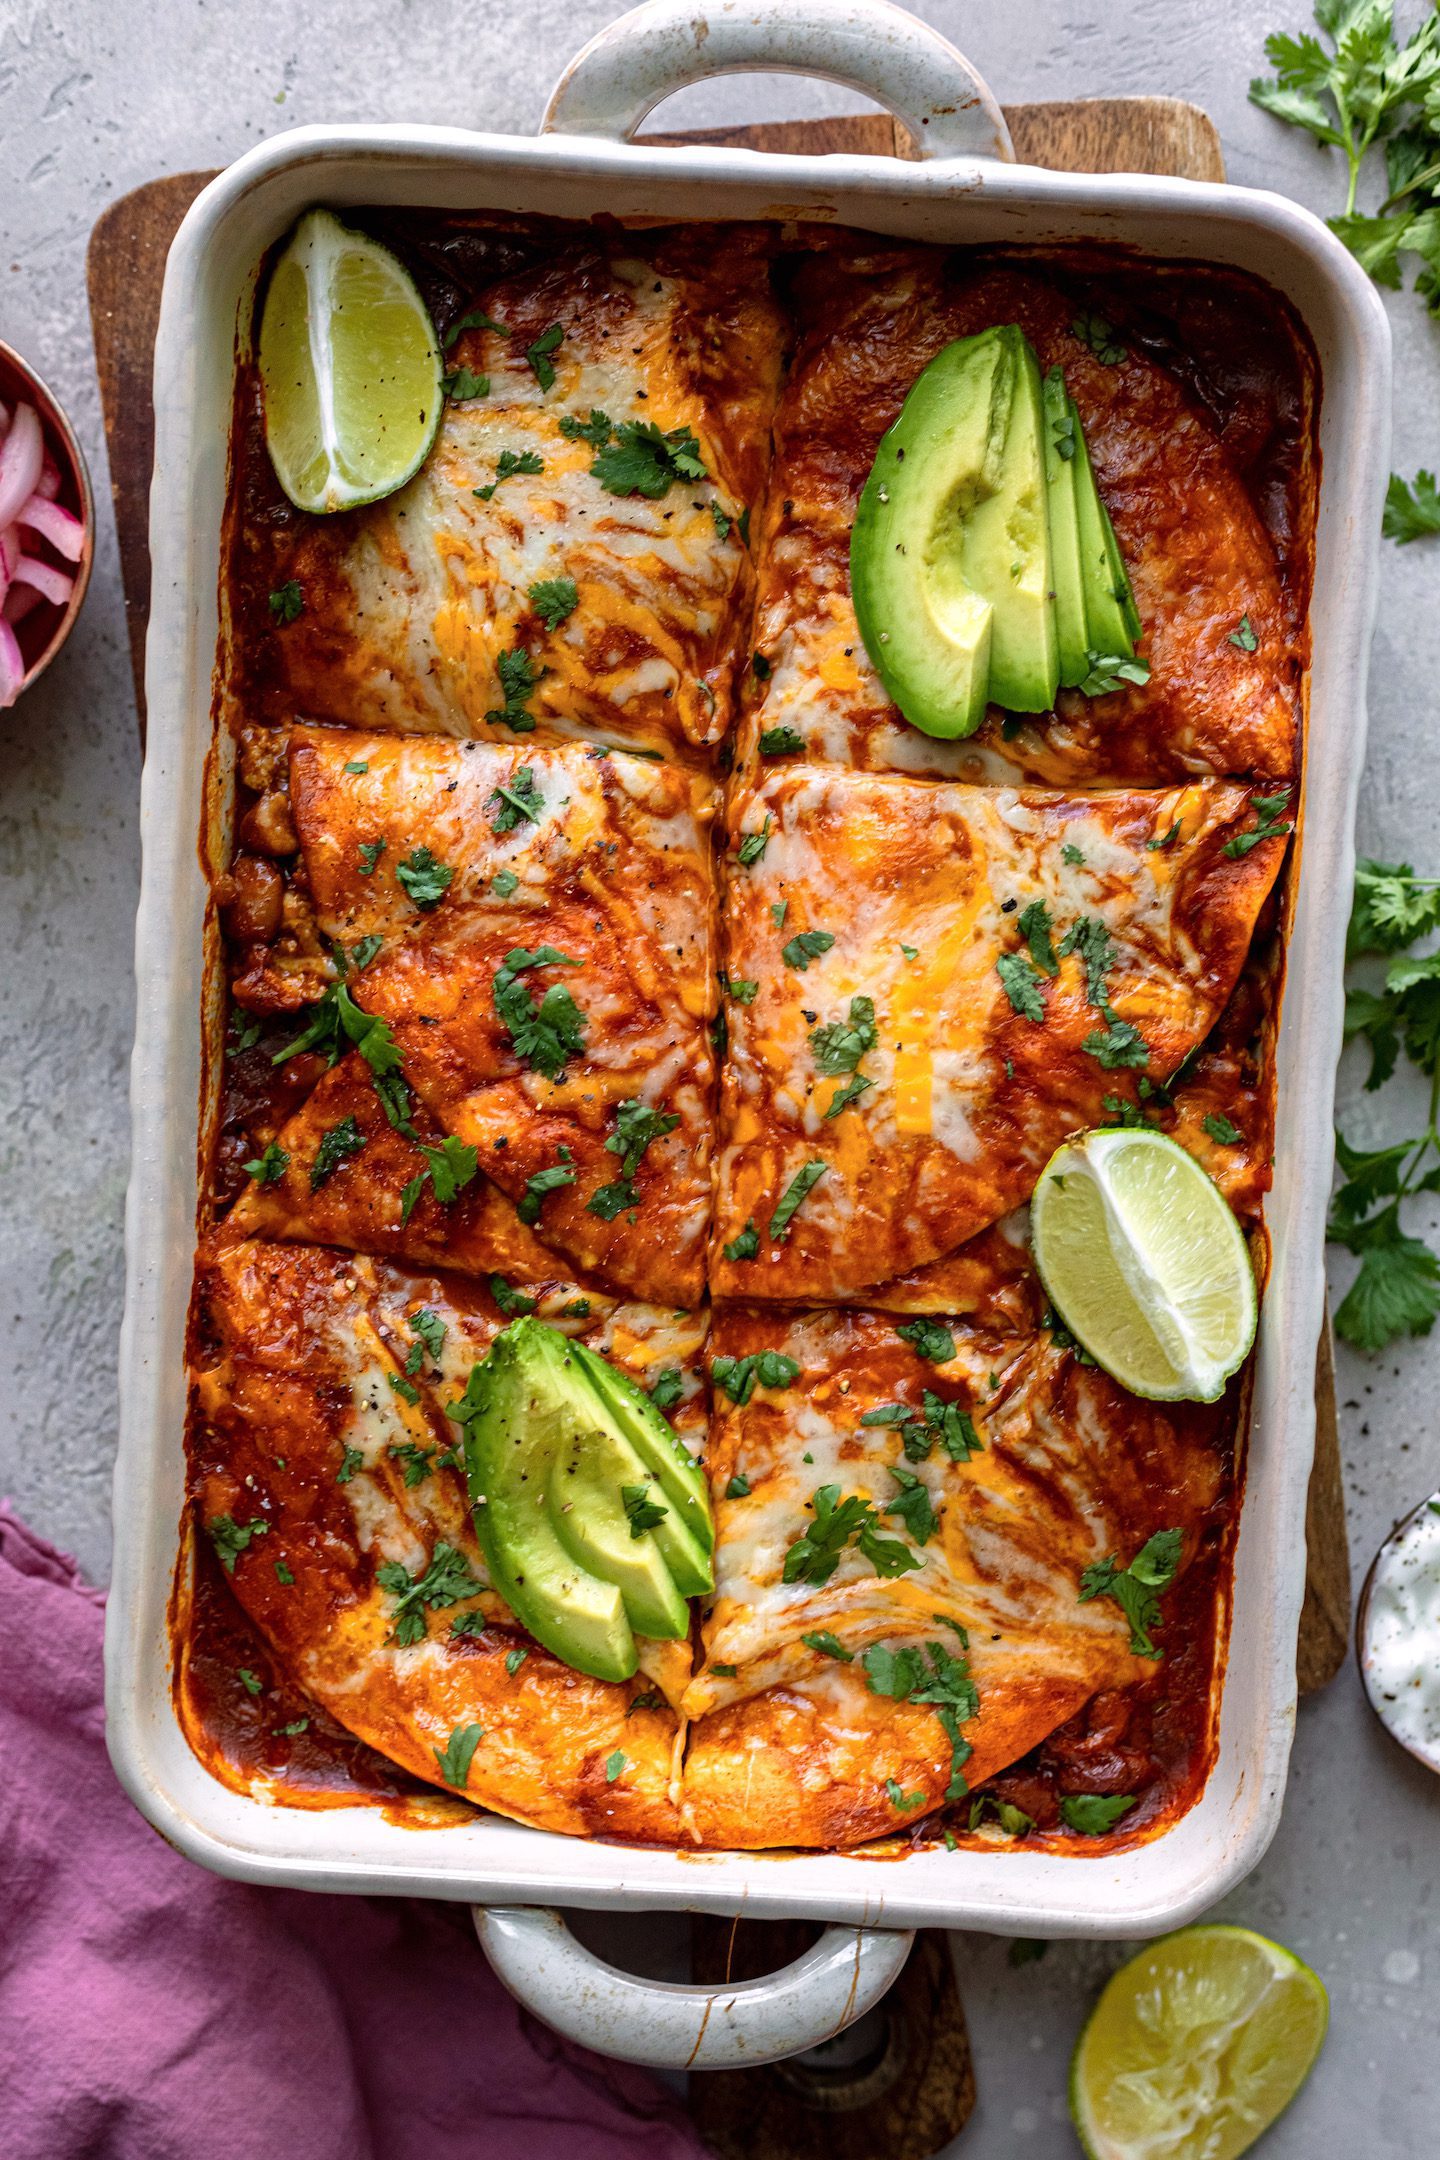 Overhead shot of an enchilada casserole garnished with sliced avocado and lime wedges.